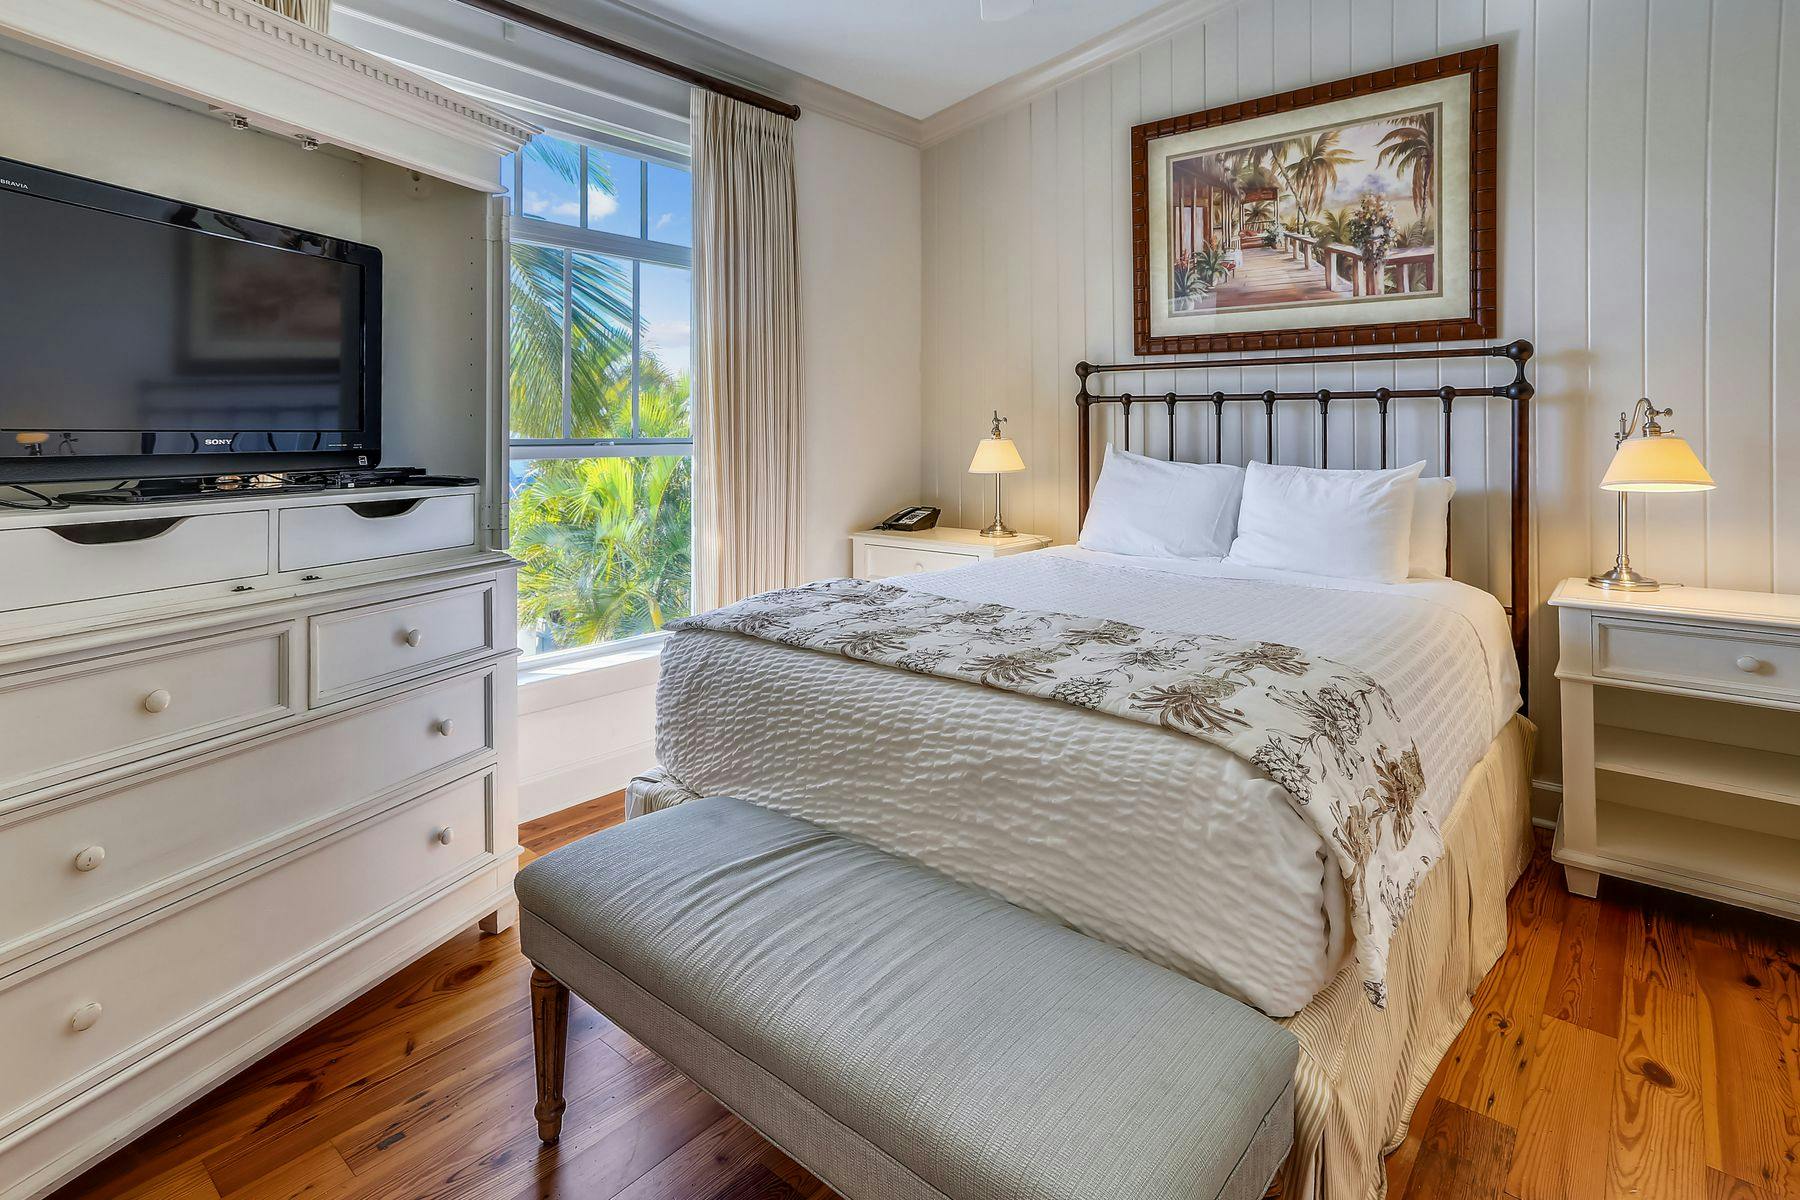 Welcome coastal chic bedroom in an Anna Maria Island vacation rental.